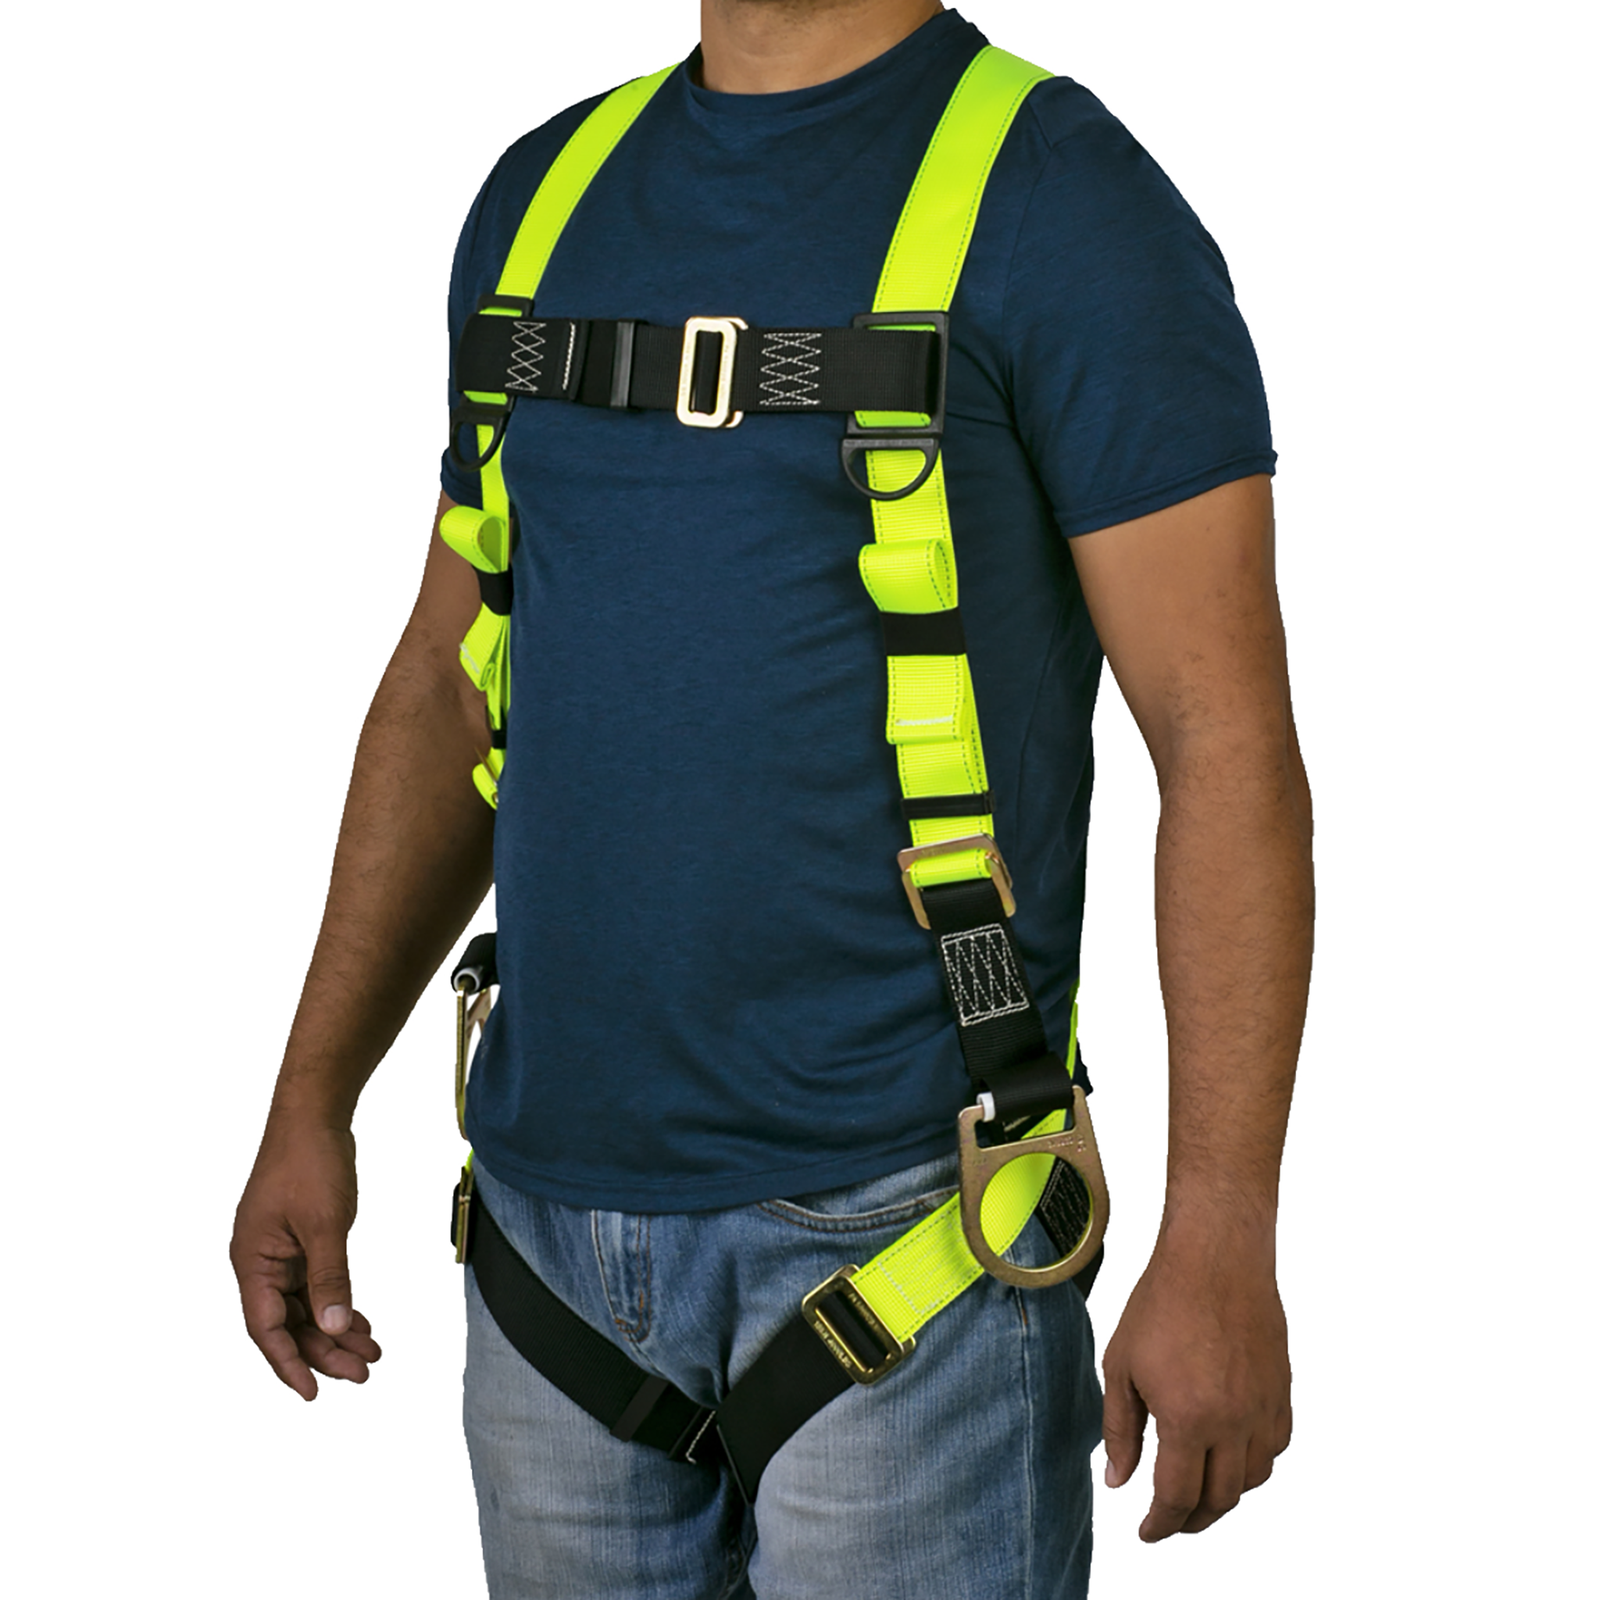 Front view of the torso of a person wearing the hi-vis yellow and black 3D fall protection safety body JORESTECH harness over white background